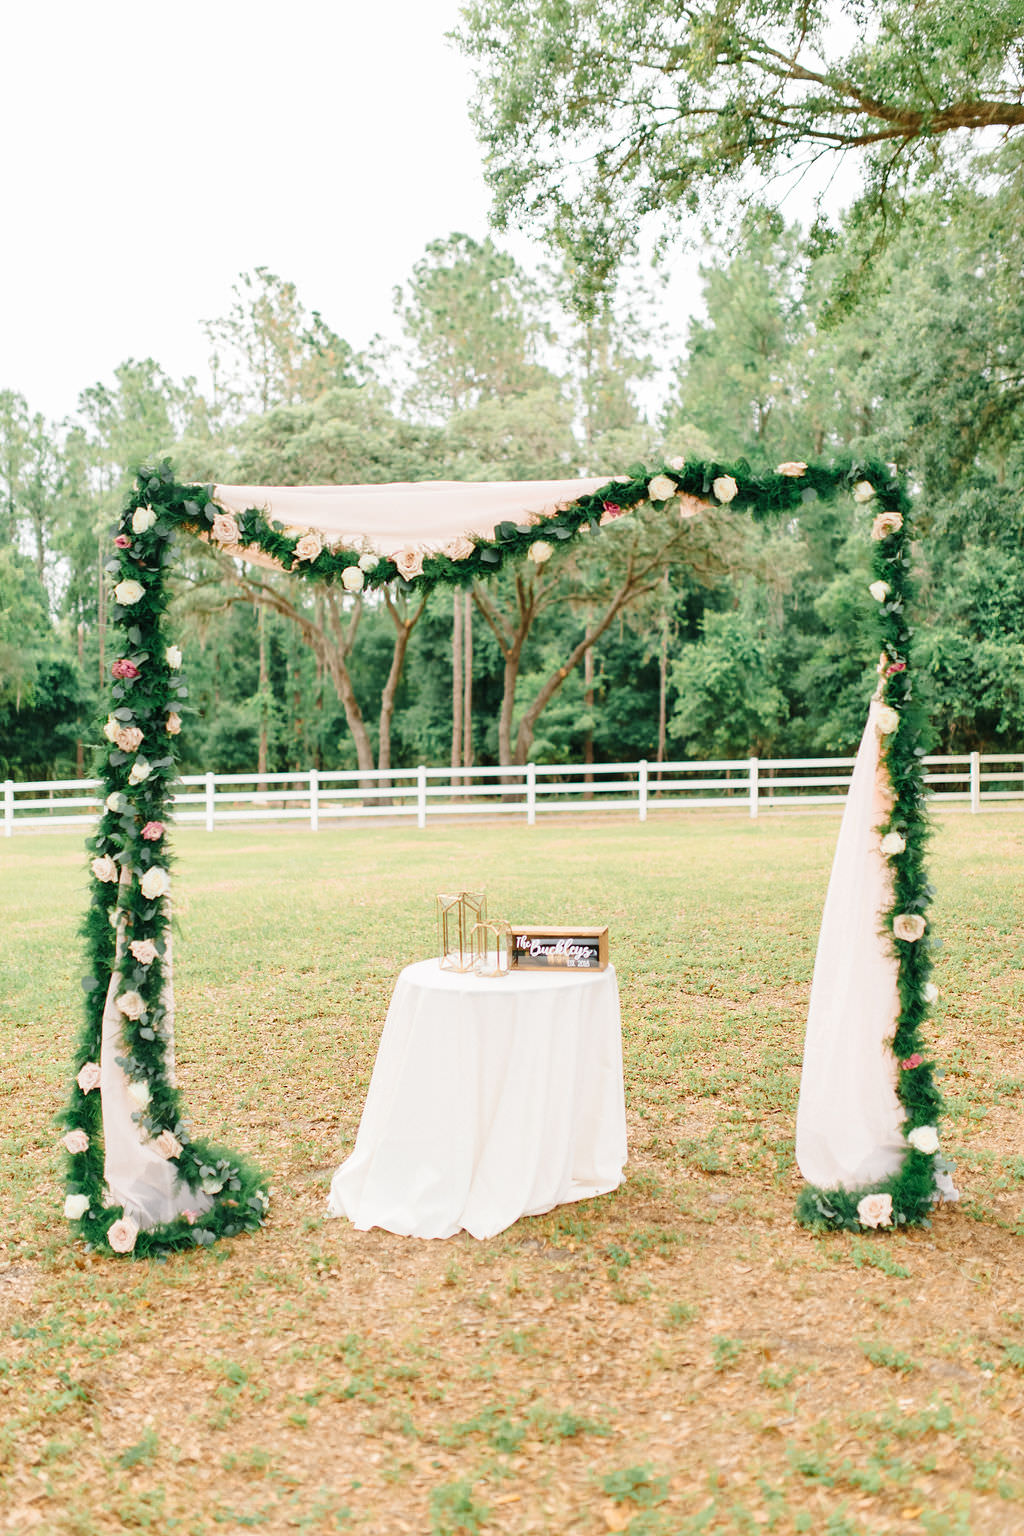 Outdoor Wedding Reception Decor, Arch with White Draping, Greenery Garland and White Flowers and Ceremony Table with White Tablecloth | Tampa Bay Wedding Planner Burlap to Lace